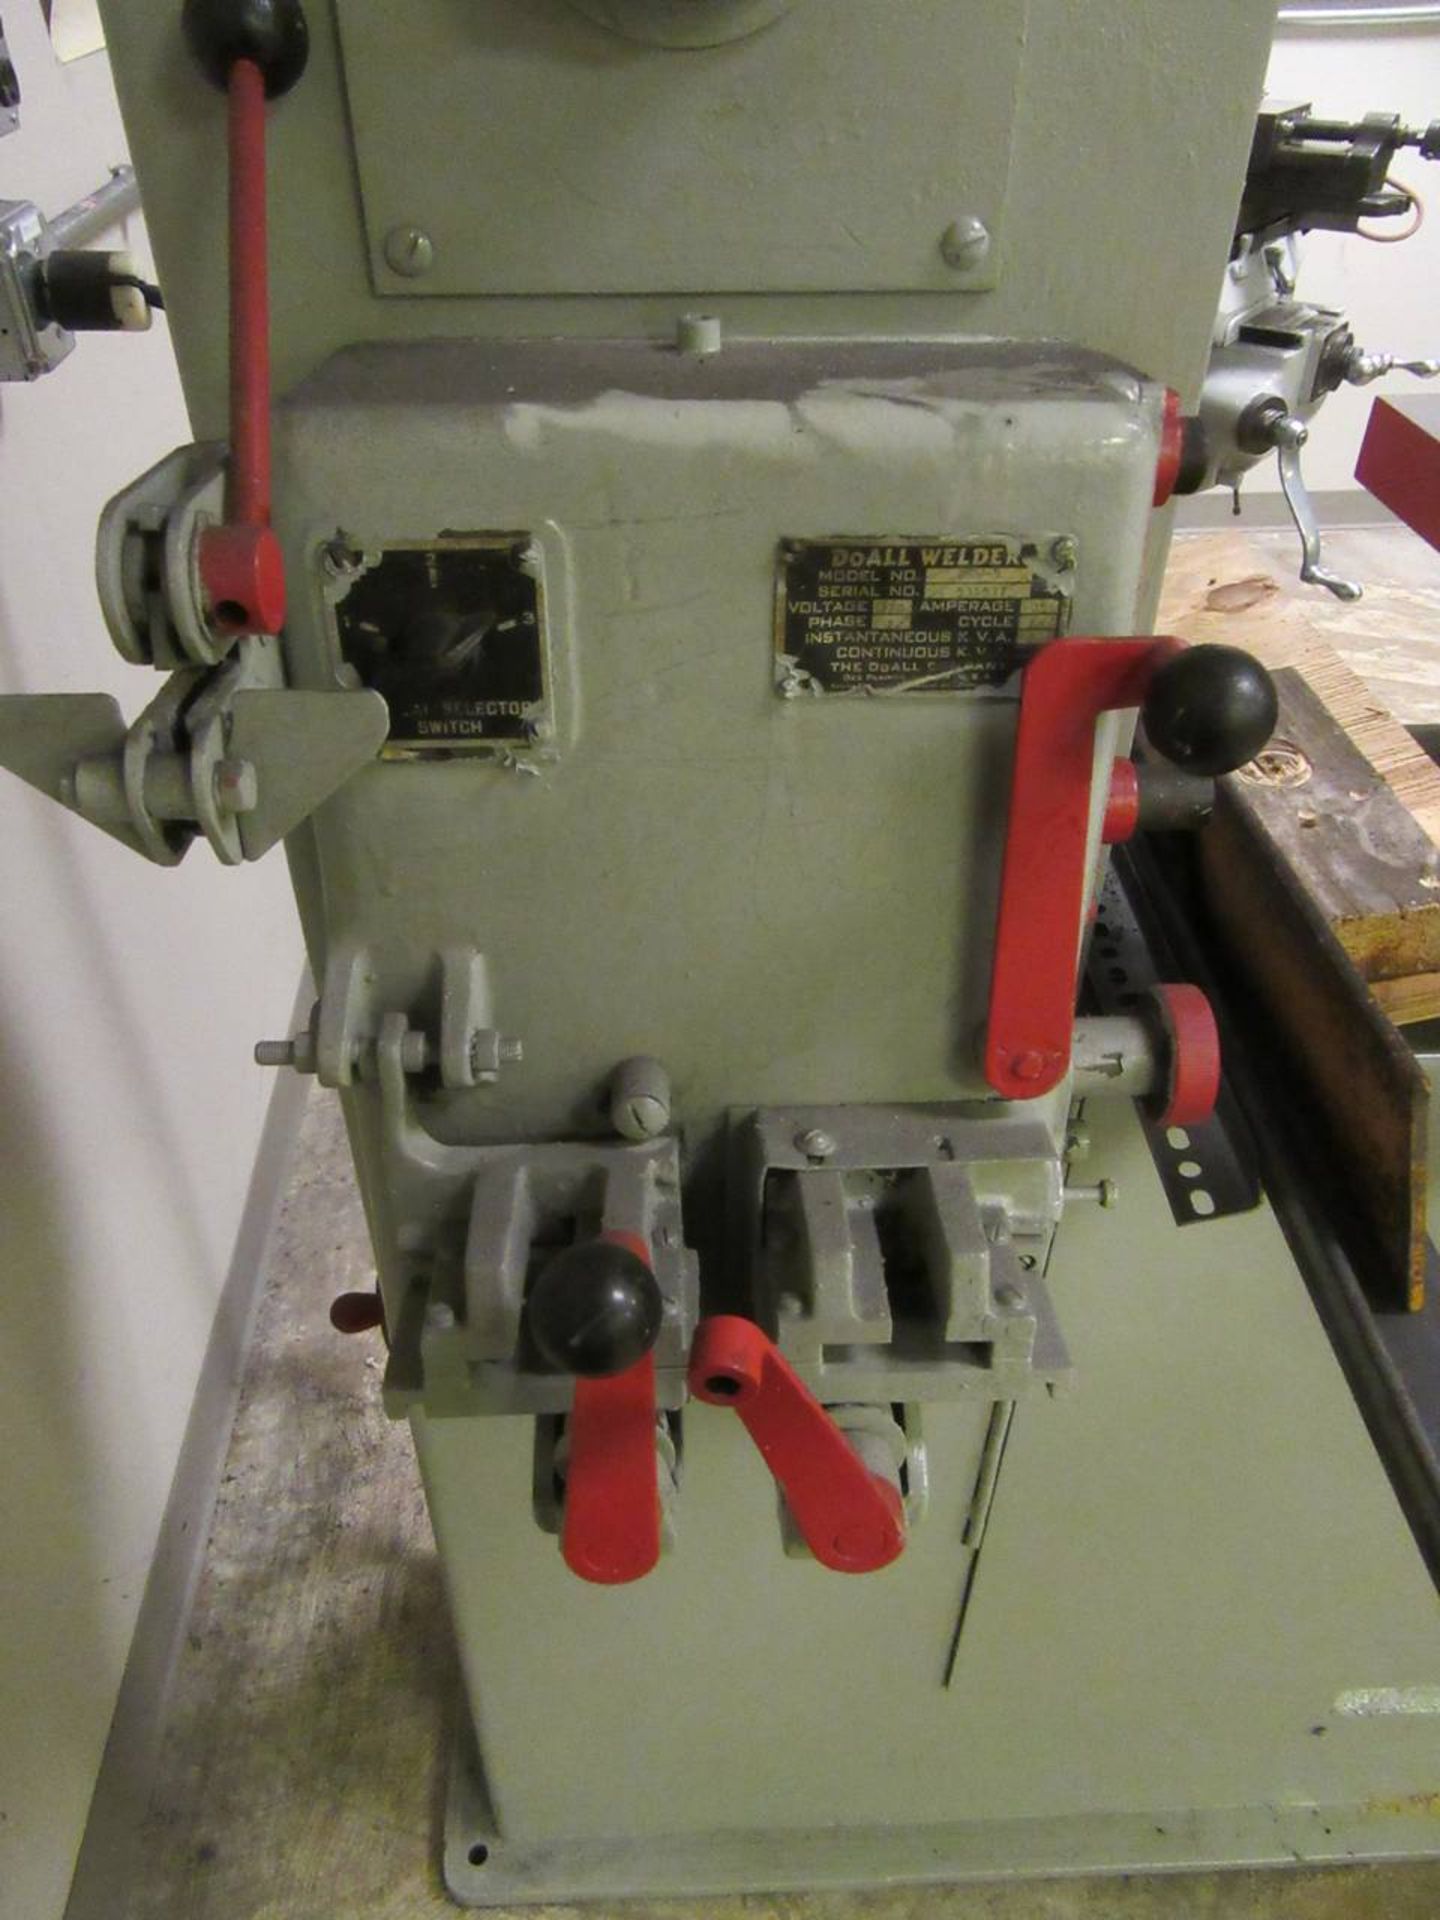 DoAll V-26 Vertical Band Saw - Image 5 of 7